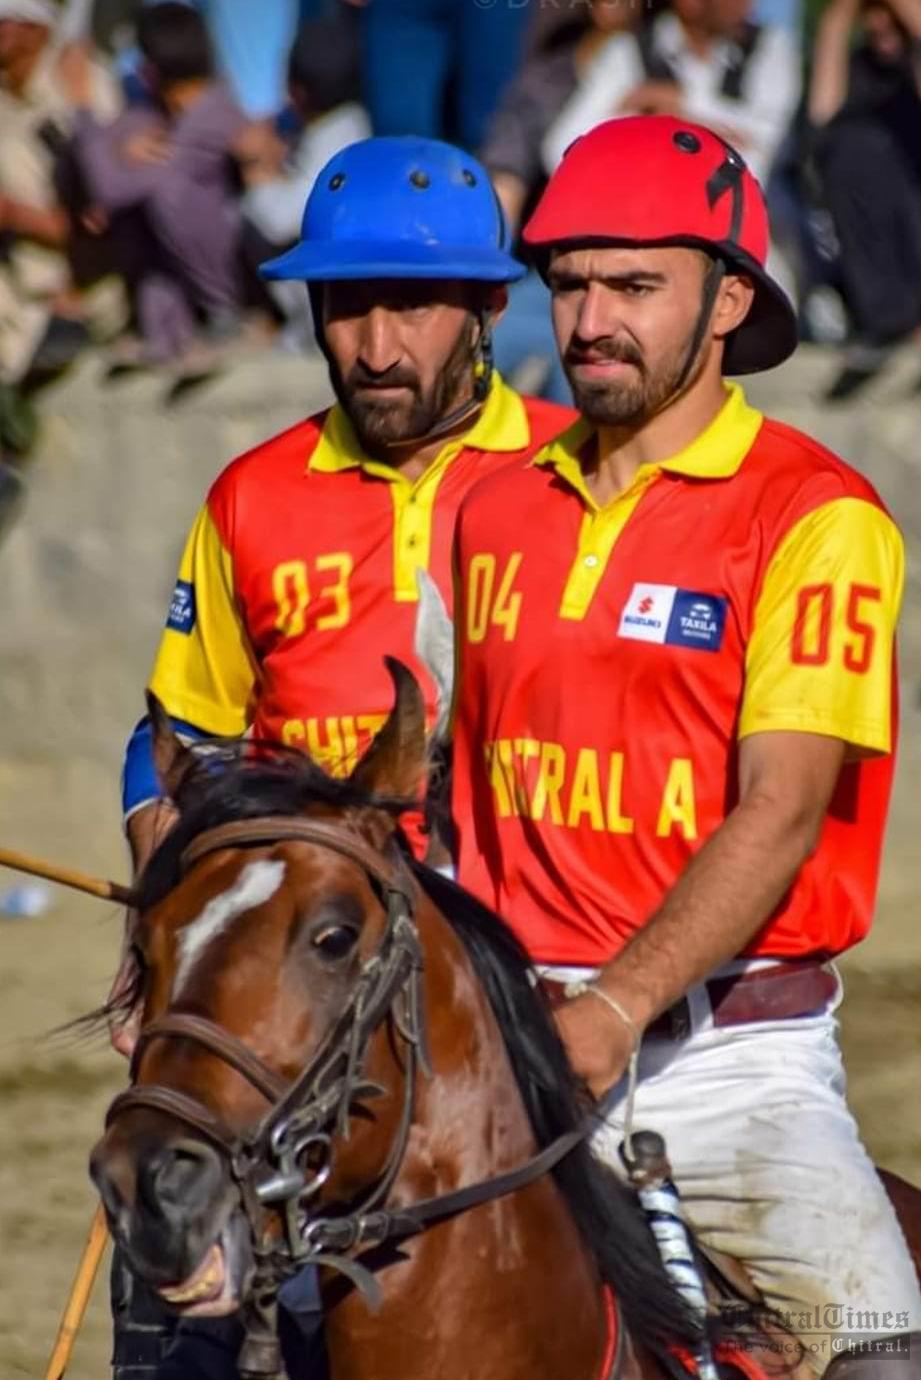 Chitraltimes chitral polo cup tournament concludes chitral A won the final 2